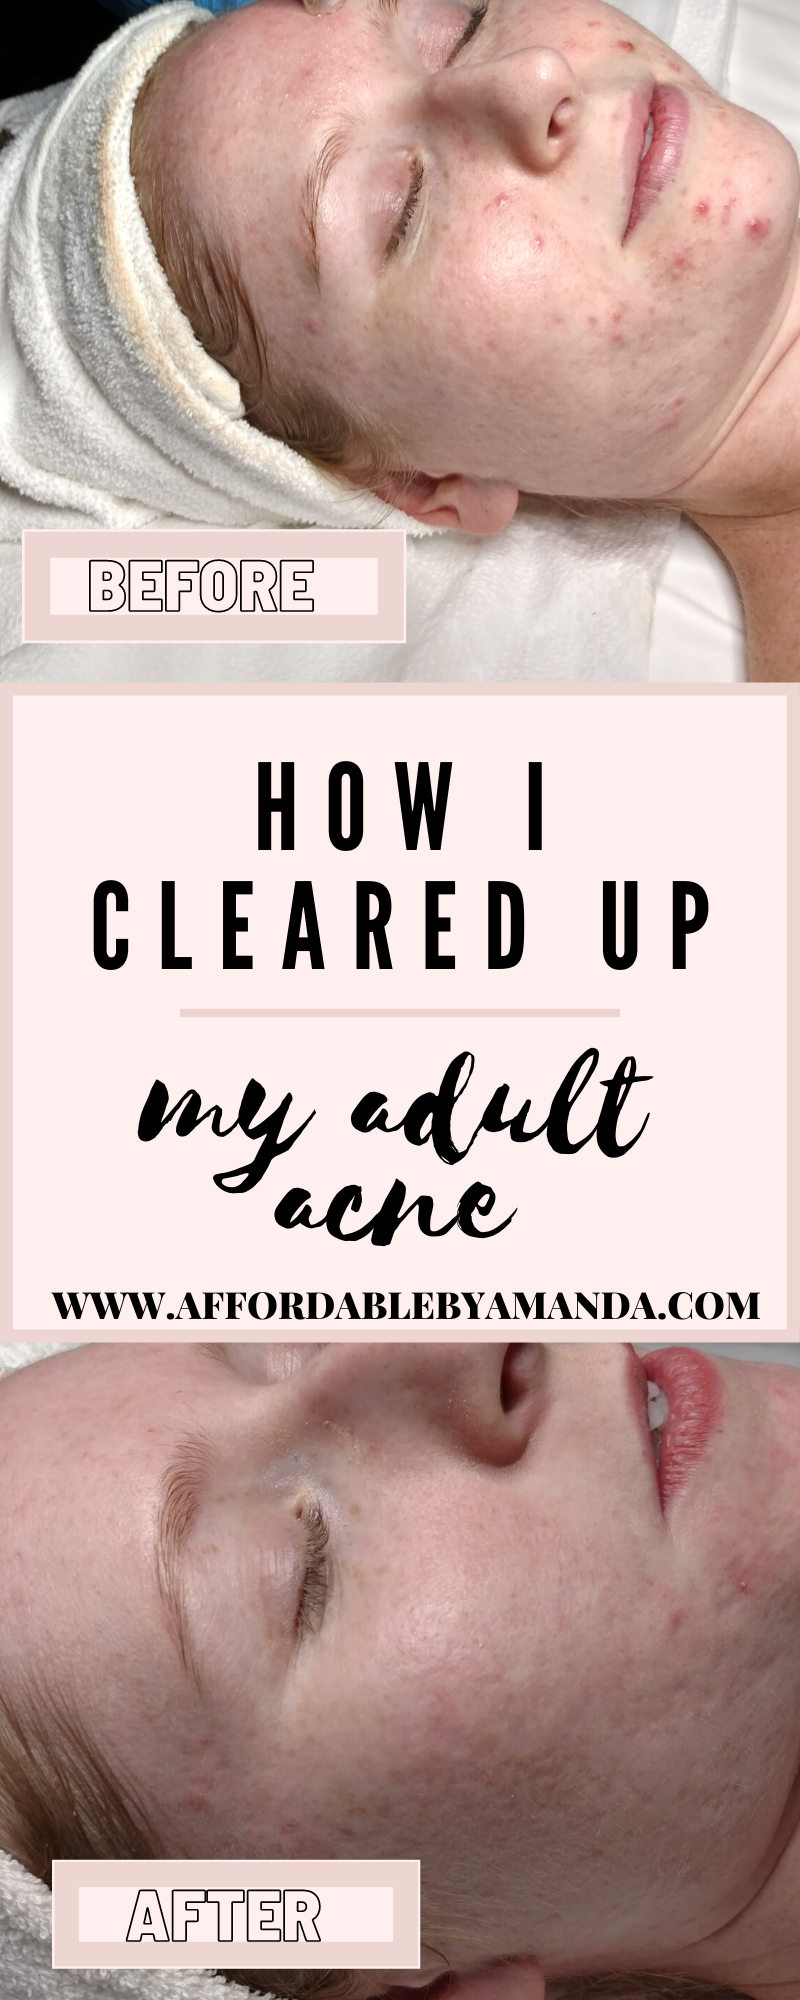 How I Cleared My Adult Acne.The Best Adult Acne Treatments 2020. How to Fight Adult Acne. The Best Adult Acne Remedies. Adult Acne Products. Adult Acne Skin Care Tips.